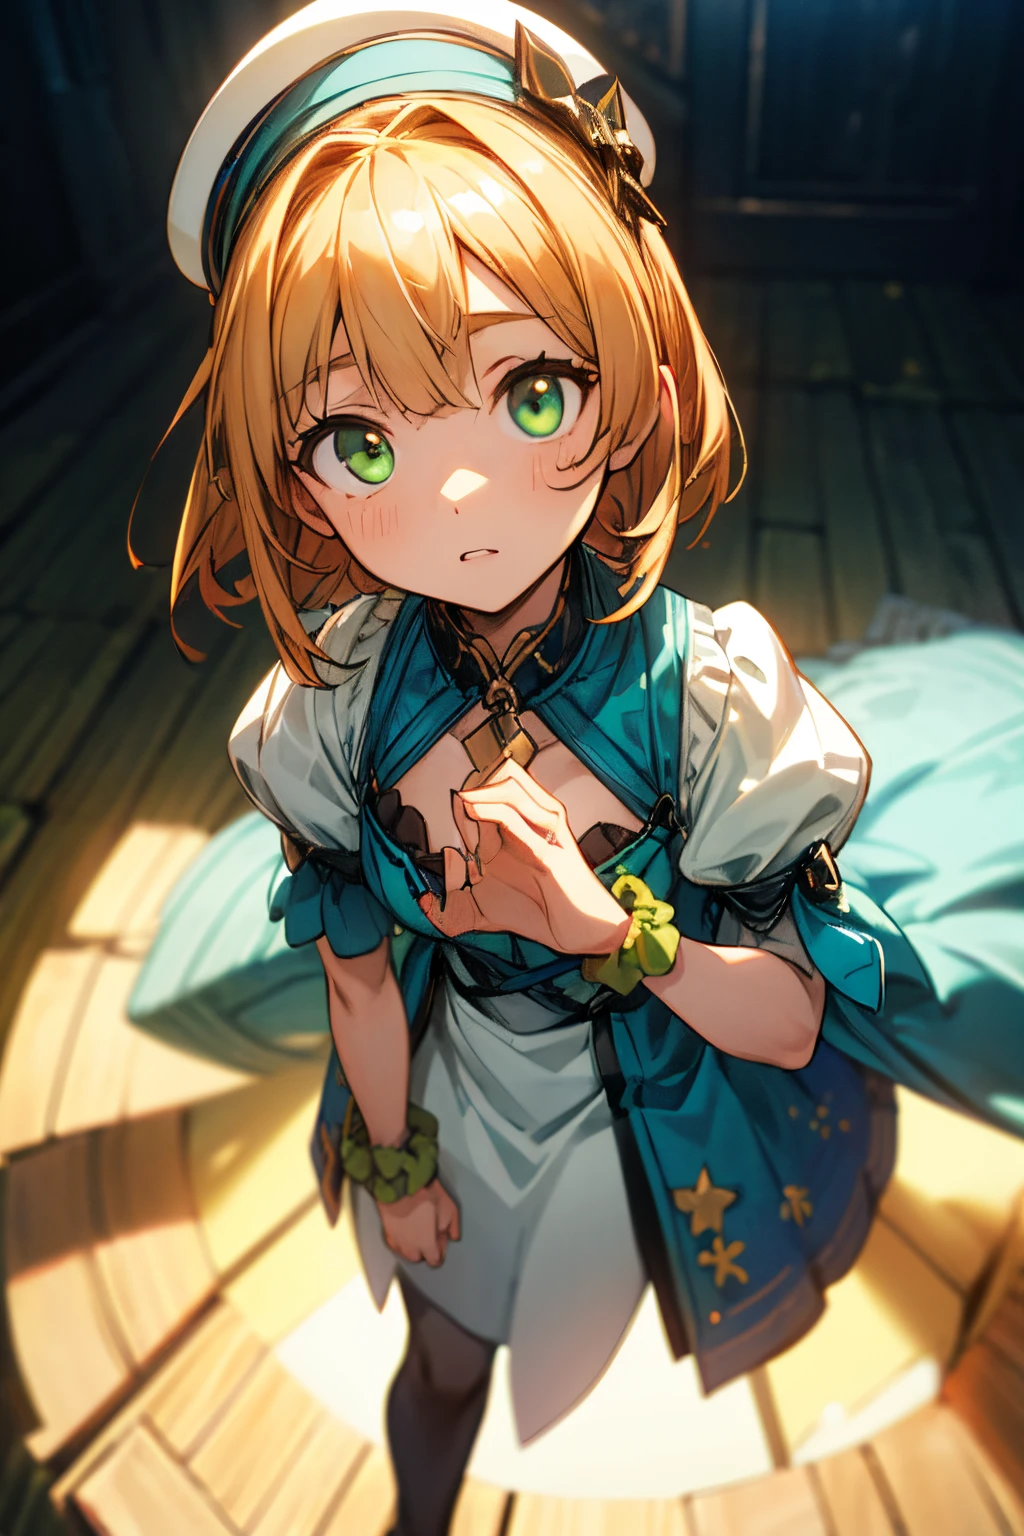 (One girl、Dressed in a dress and hat, girls' frontline, Midsummer themed costumes, multilayered outfit,Dressed, Mid summer、Soio、Top image quality, Transverse conveying，Half-length picture，largeeyes，eye closeup，（with short golden hair），（Green eyes），hair scrunchie，small thighest qualtiy， （stocklings，Elaborate Eyes, head looking up，Reasonable body structure，Young，Extremely detailed face, Perfect lighting, Extremely detailed CG, (Perfect hands, Perfect anatomy)